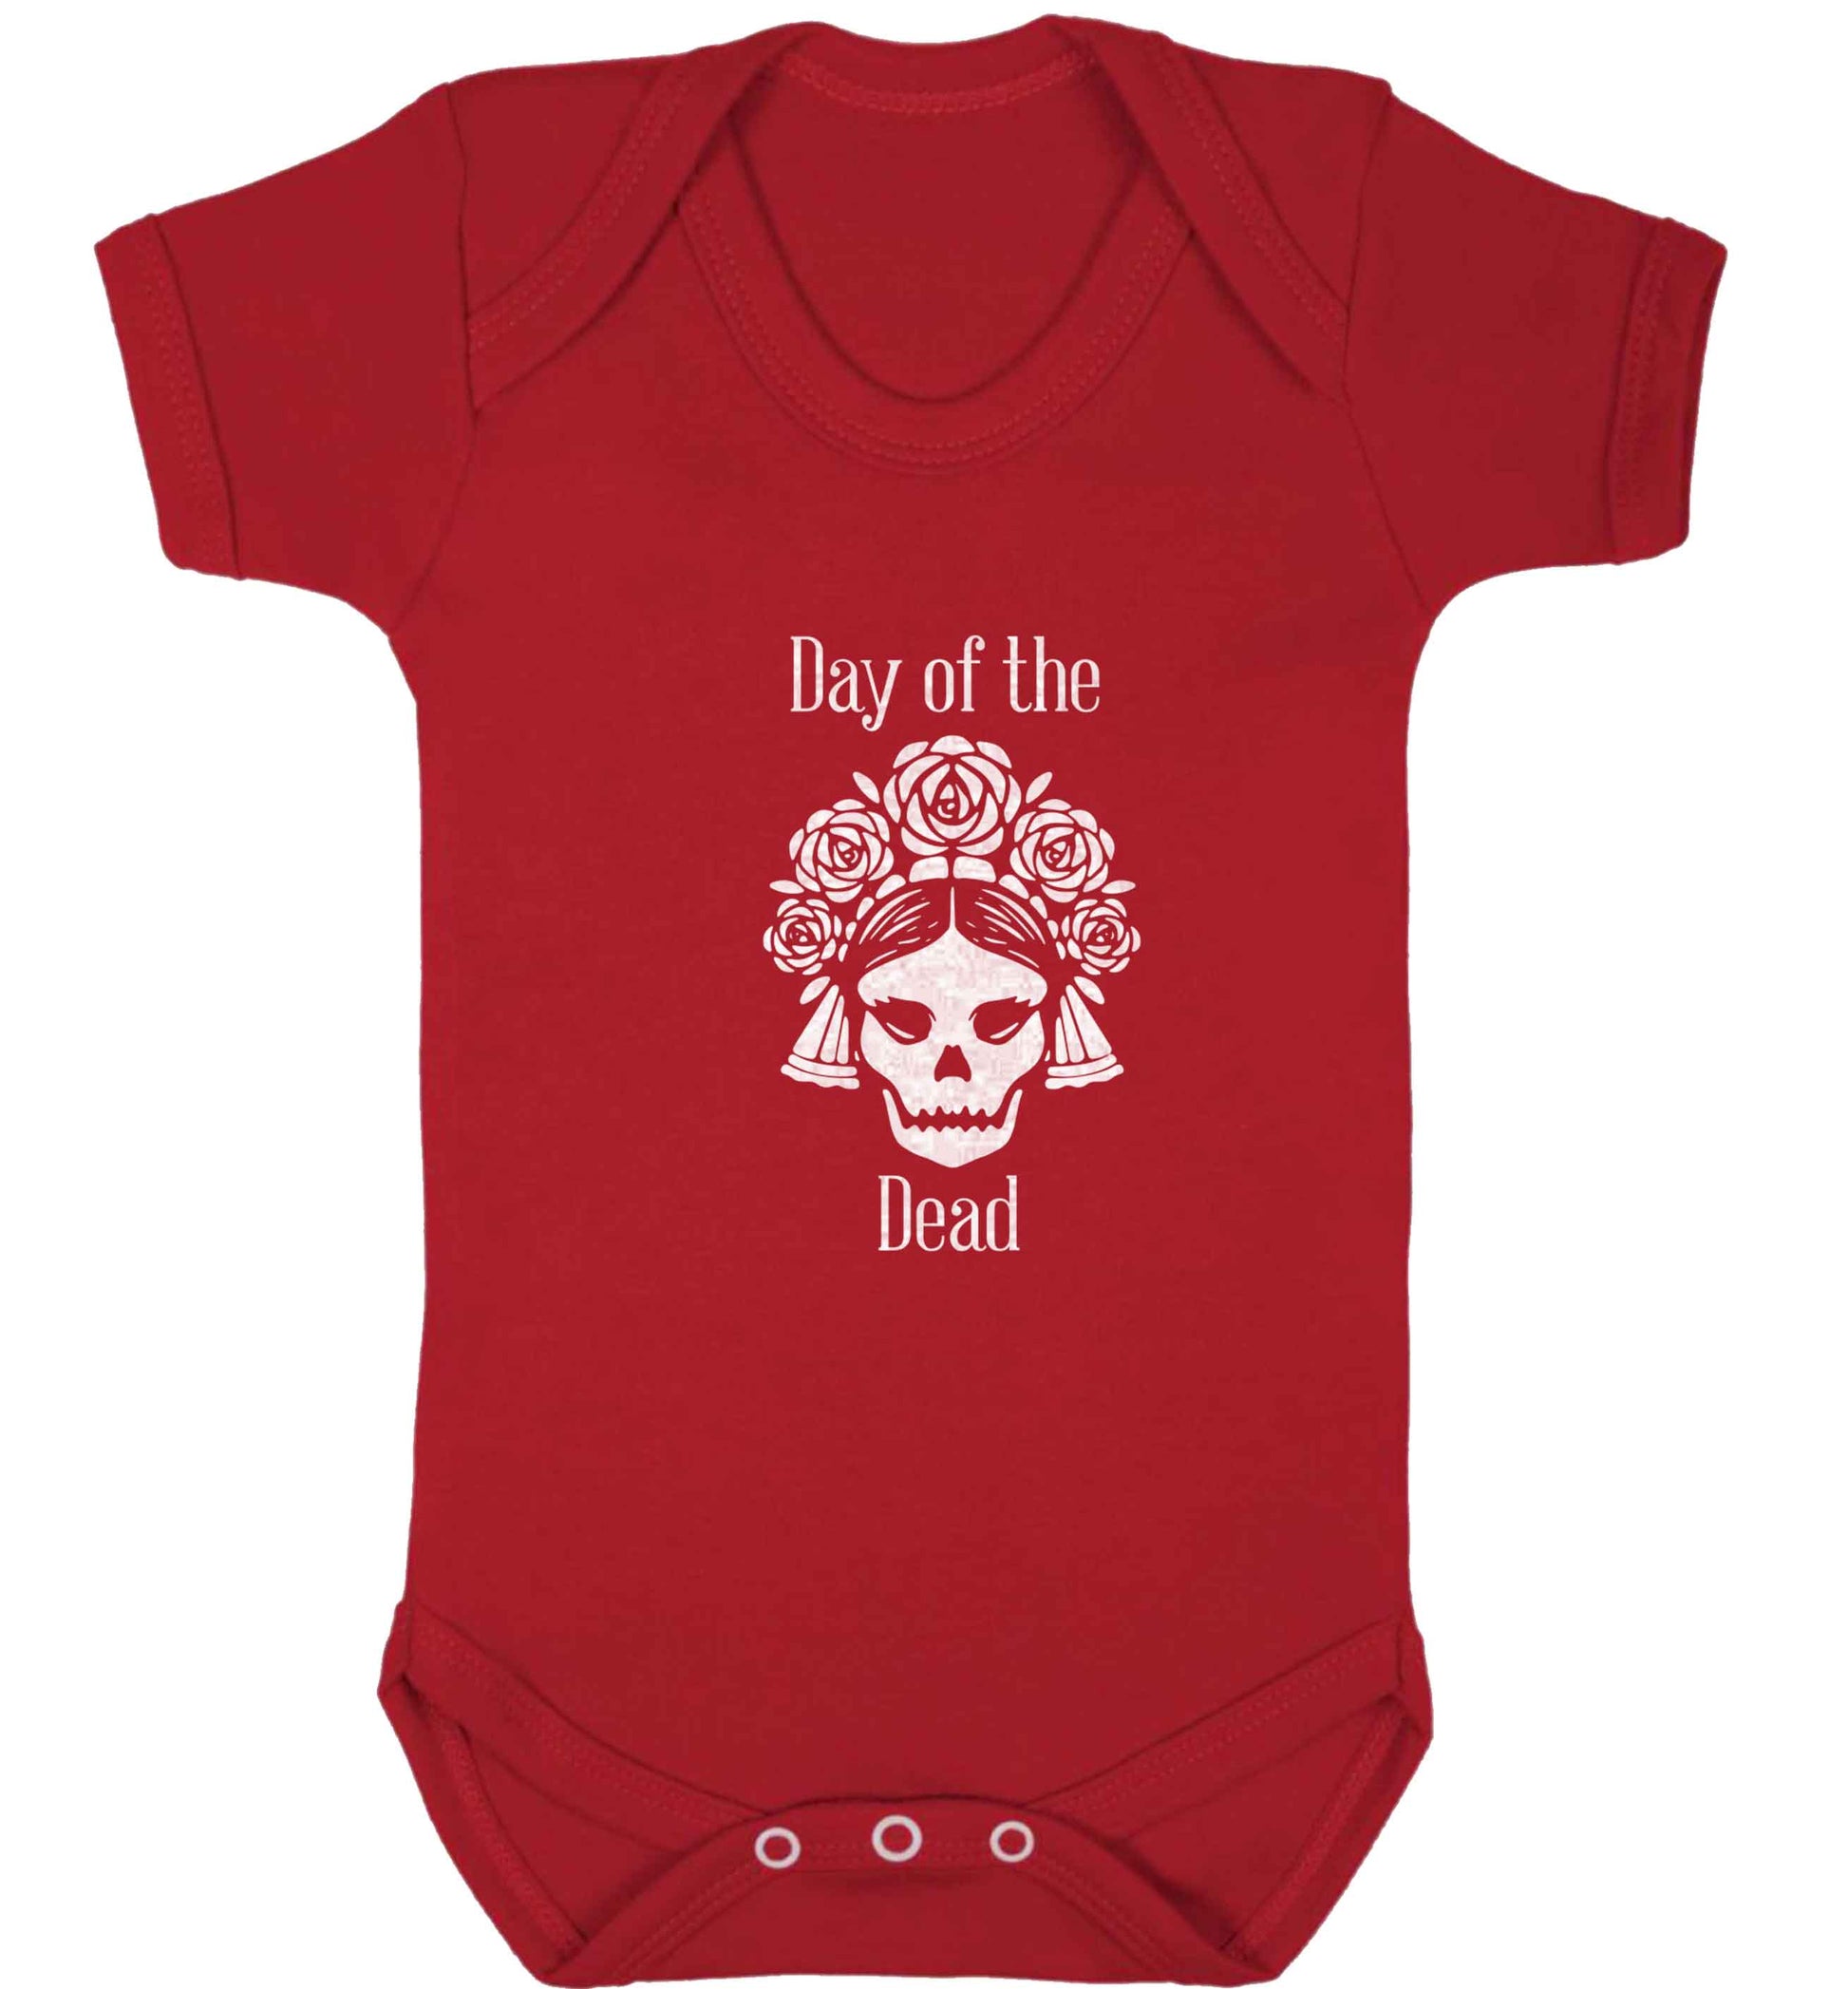 Day of the dead baby vest red 18-24 months